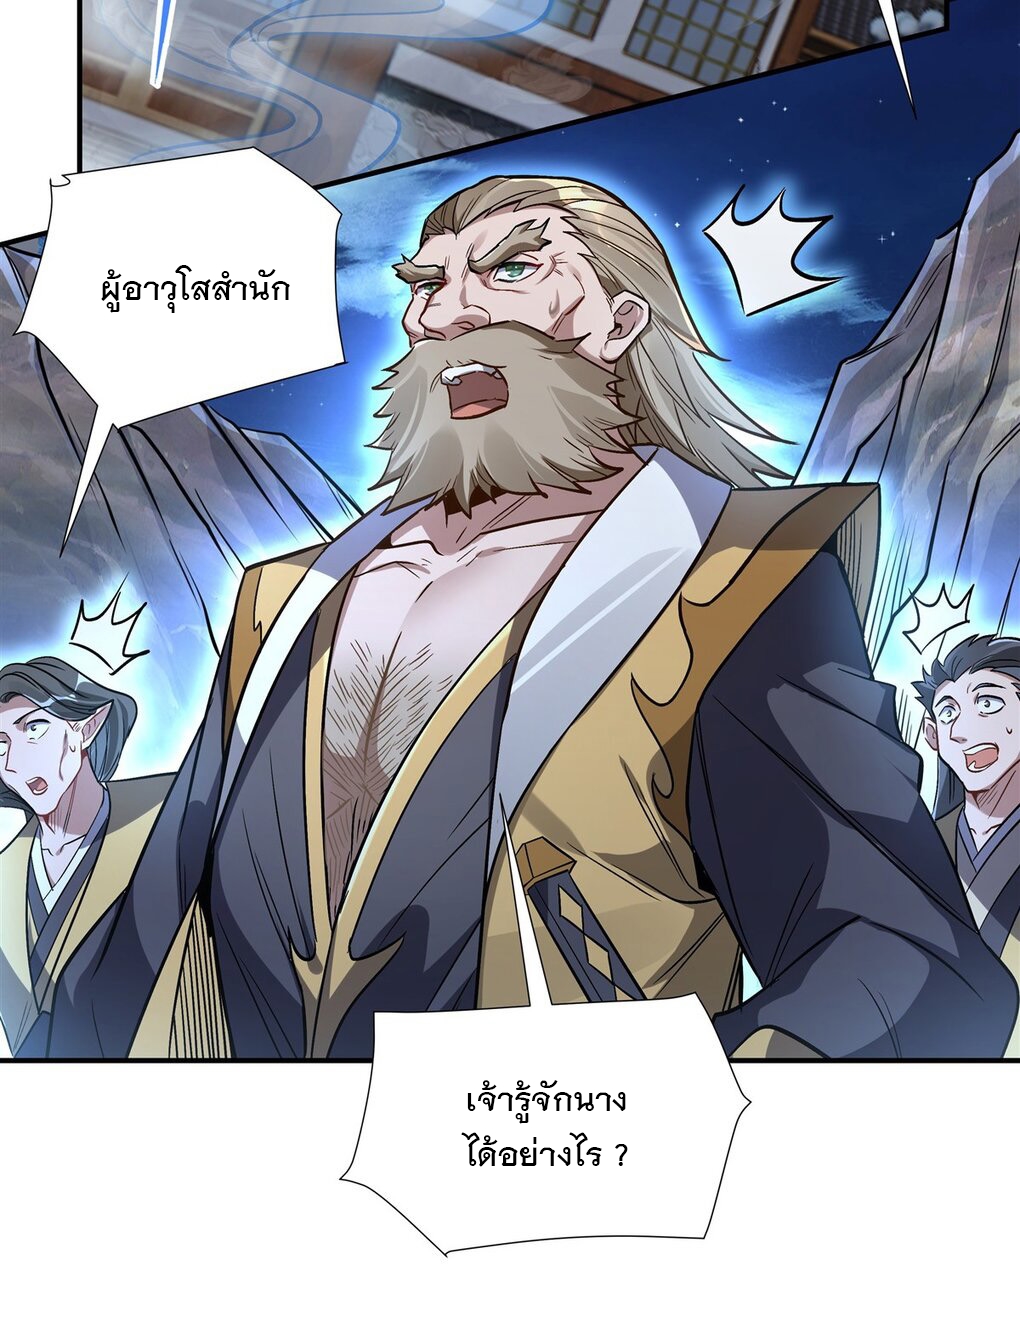 My Female Apprentices Are All Big Shots From the Future Ã Â¸â€¢Ã Â¸Â­Ã Â¸â„¢Ã Â¸â€”Ã Â¸ÂµÃ Â¹Ë† 97 (39)